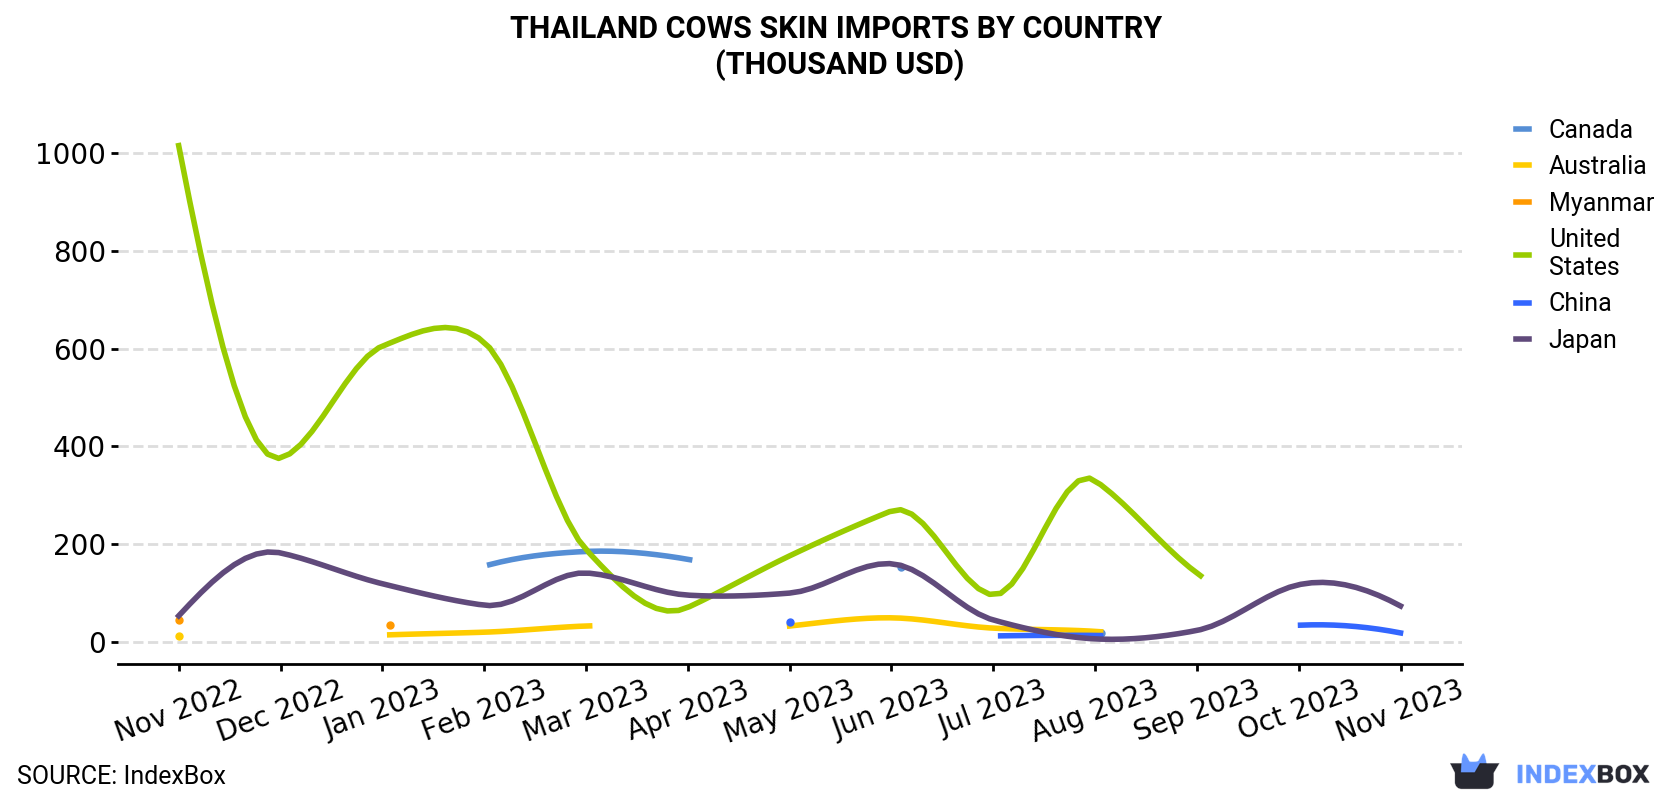 Thailand Cows Skin Imports By Country (Thousand USD)